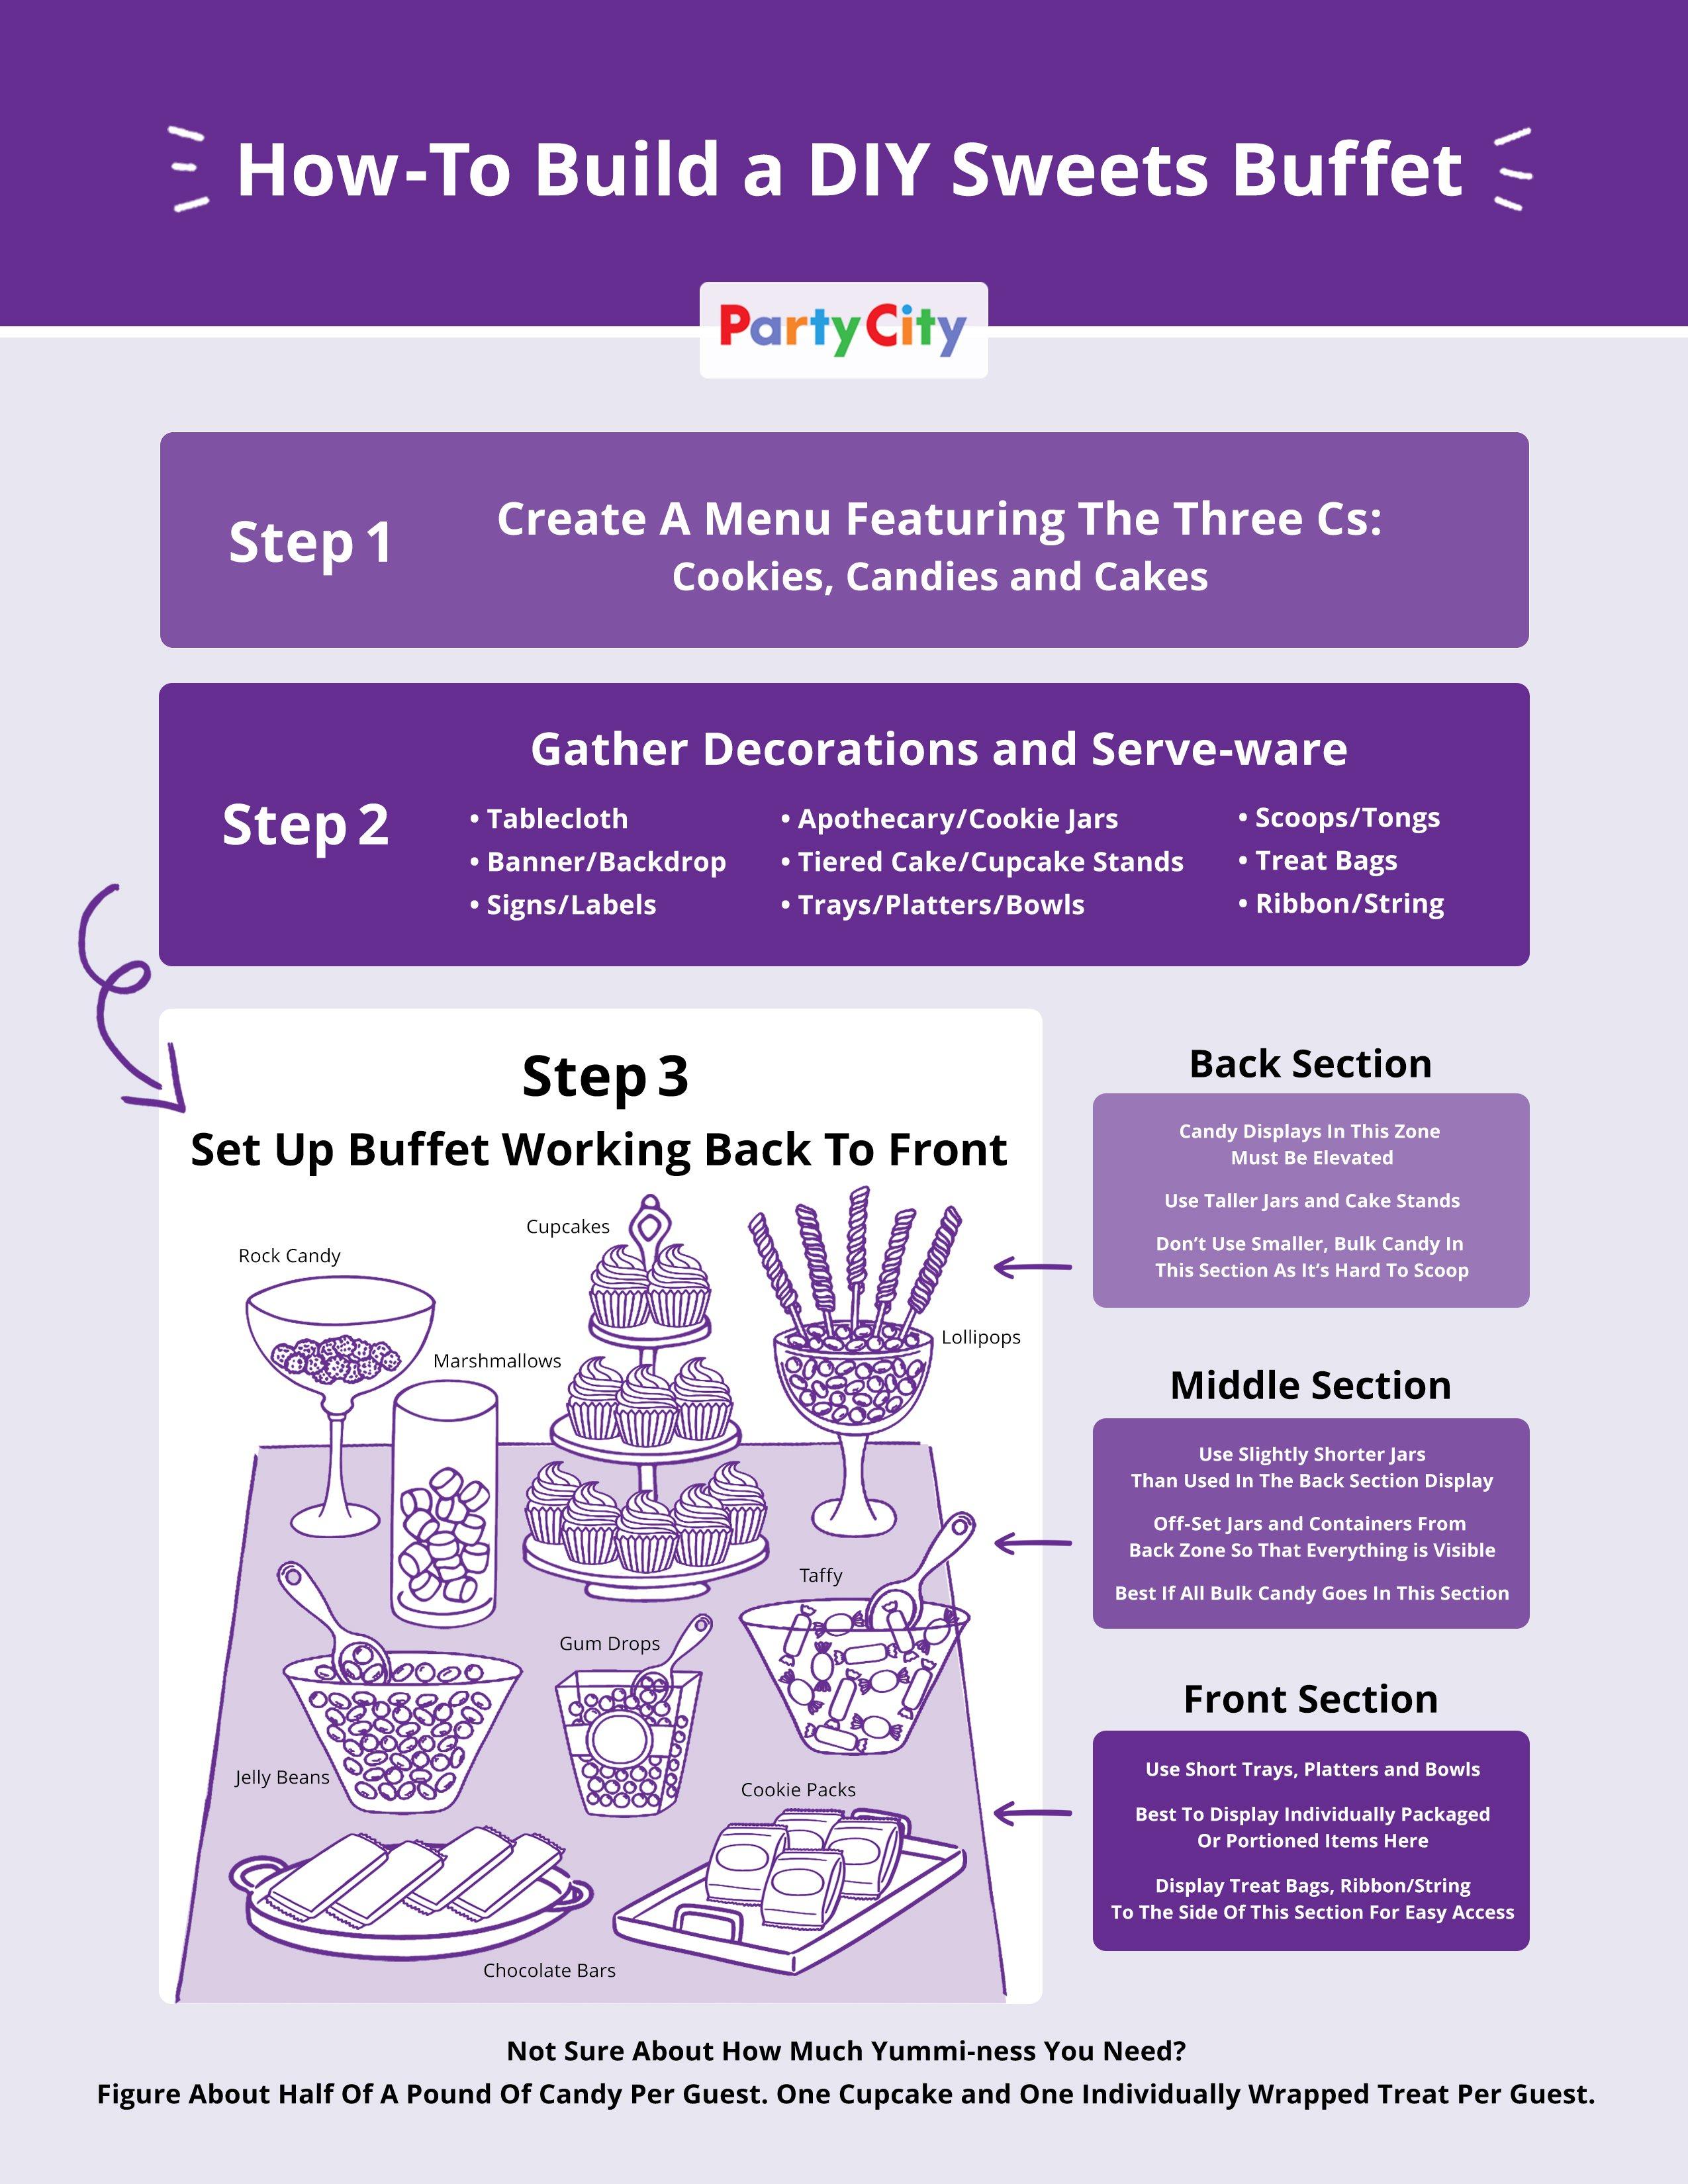 Sweets Buffet Infographic